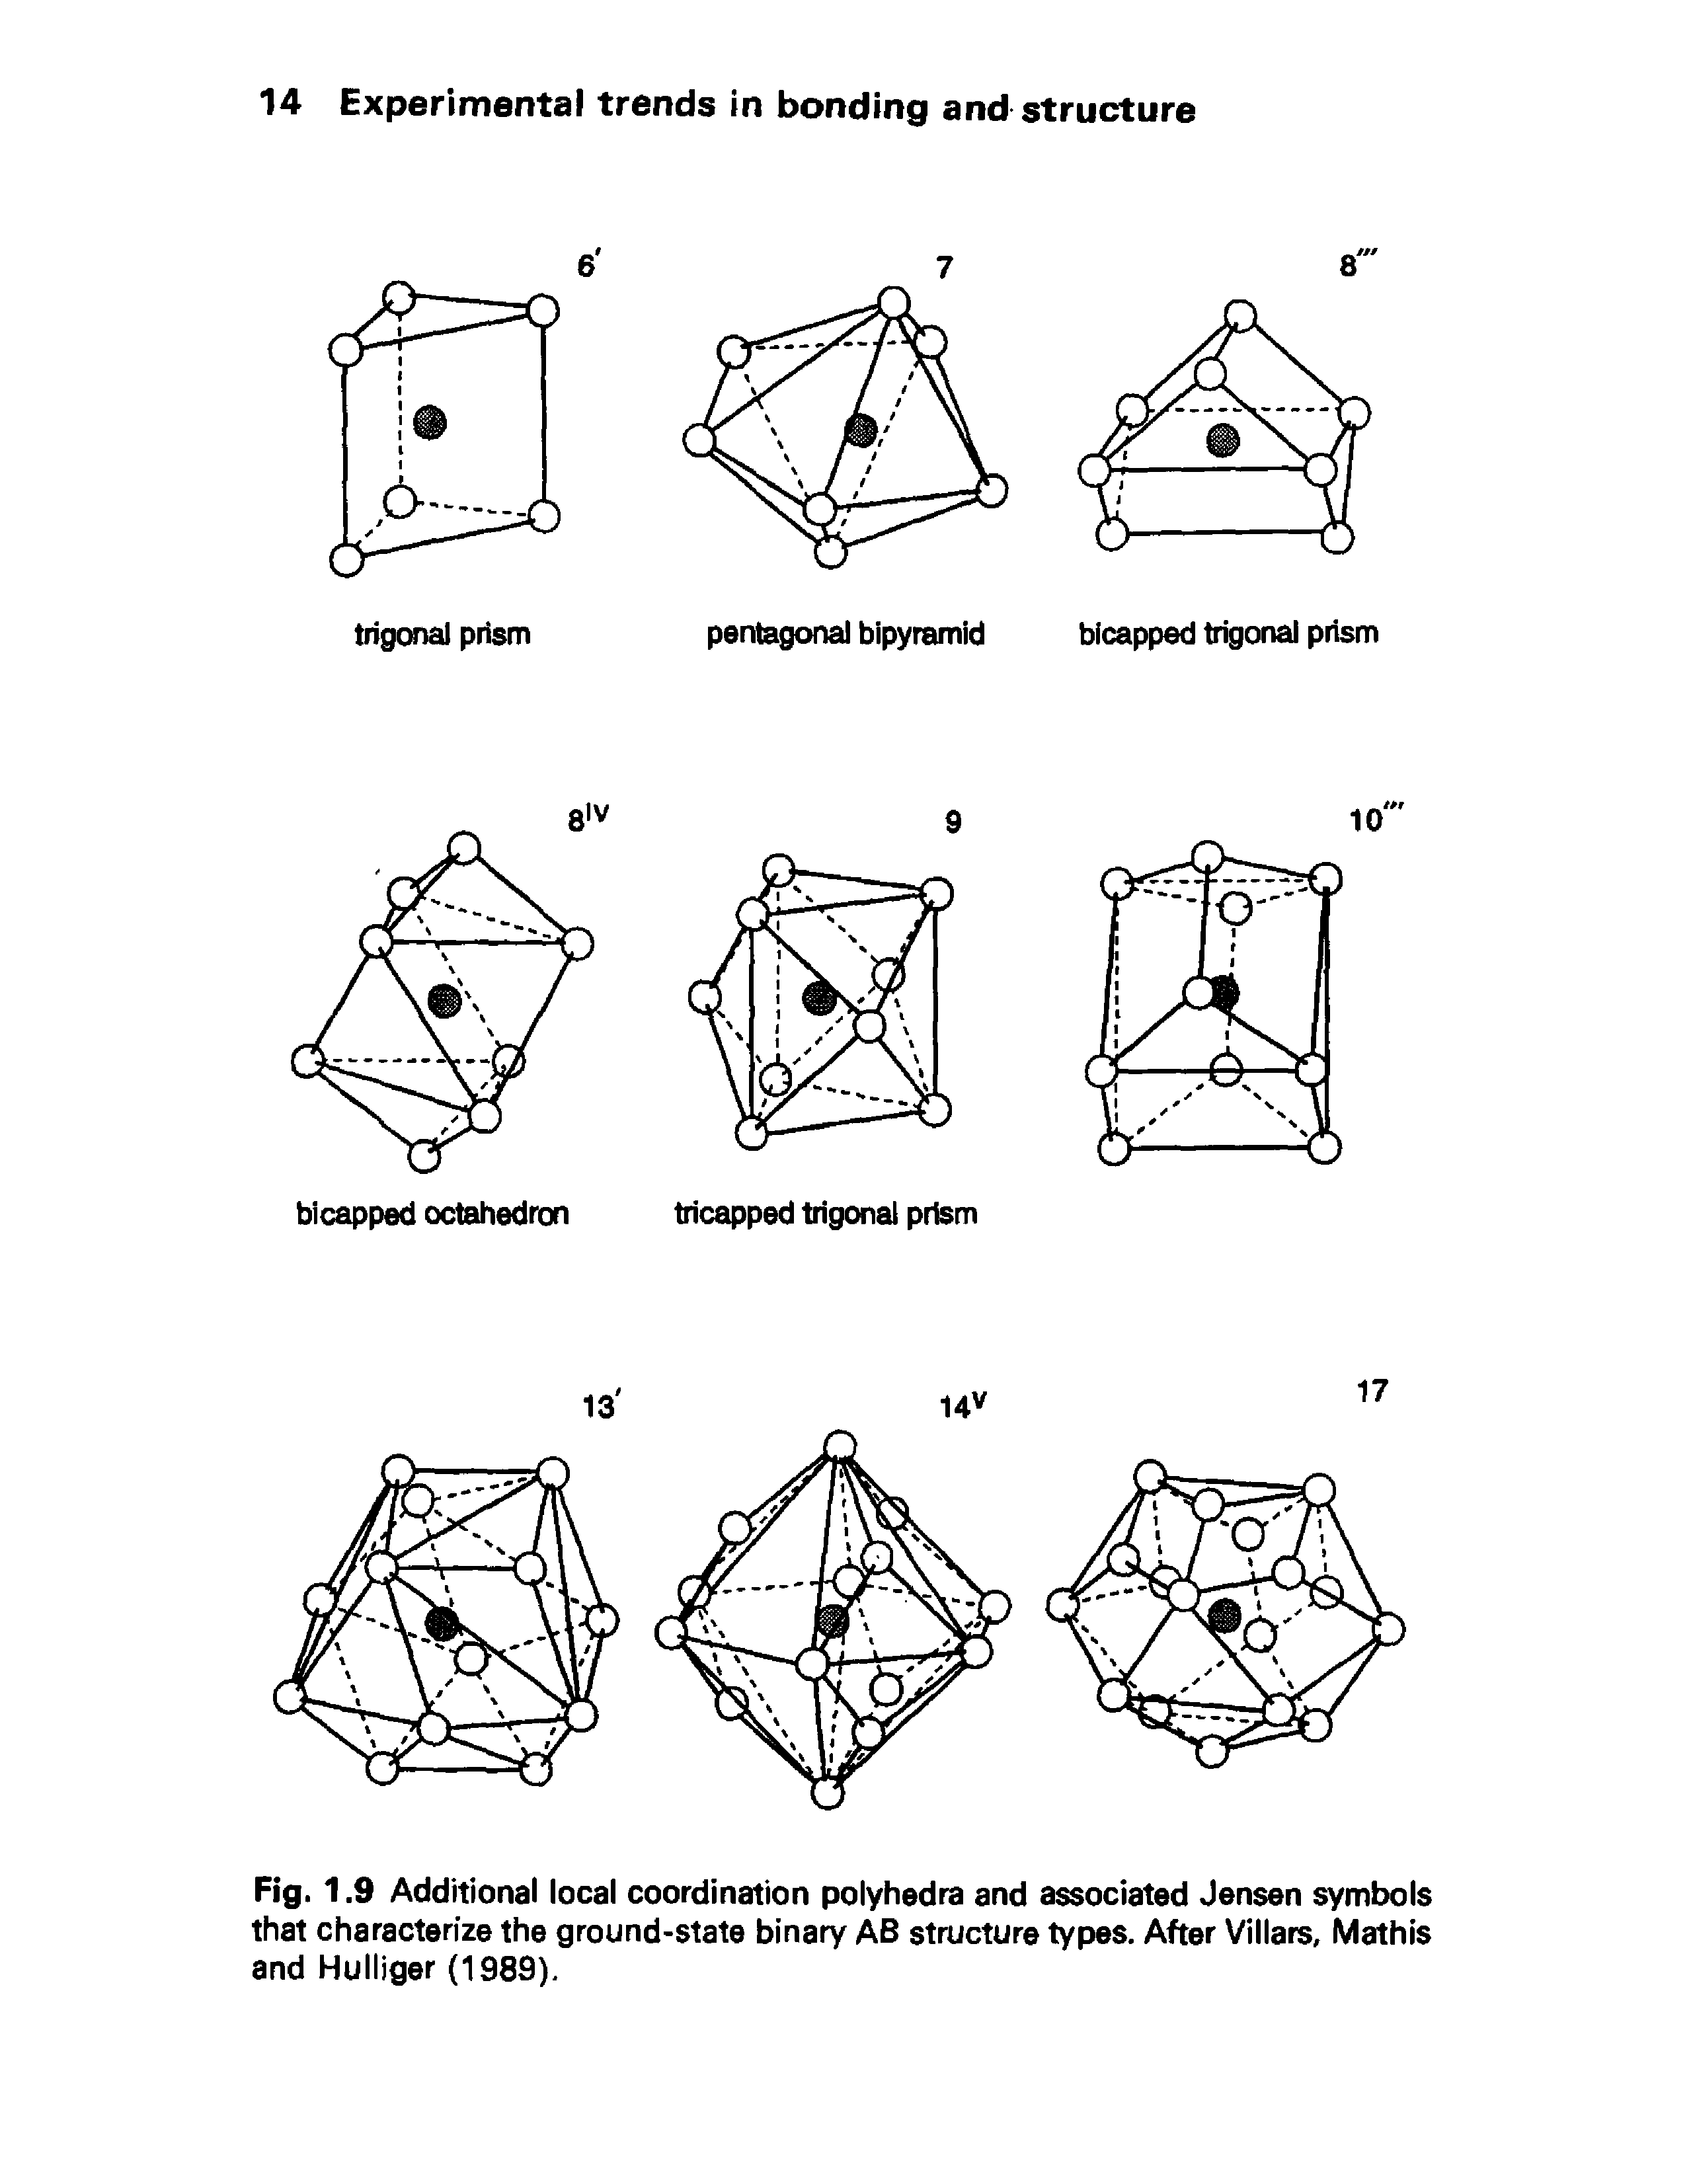 Fig. 1.9 Additional local coordination polyhedra and associated Jensen symbols that characterize the ground-state binary AB structure types. After Villars, Mathis and Hulliger (1989).